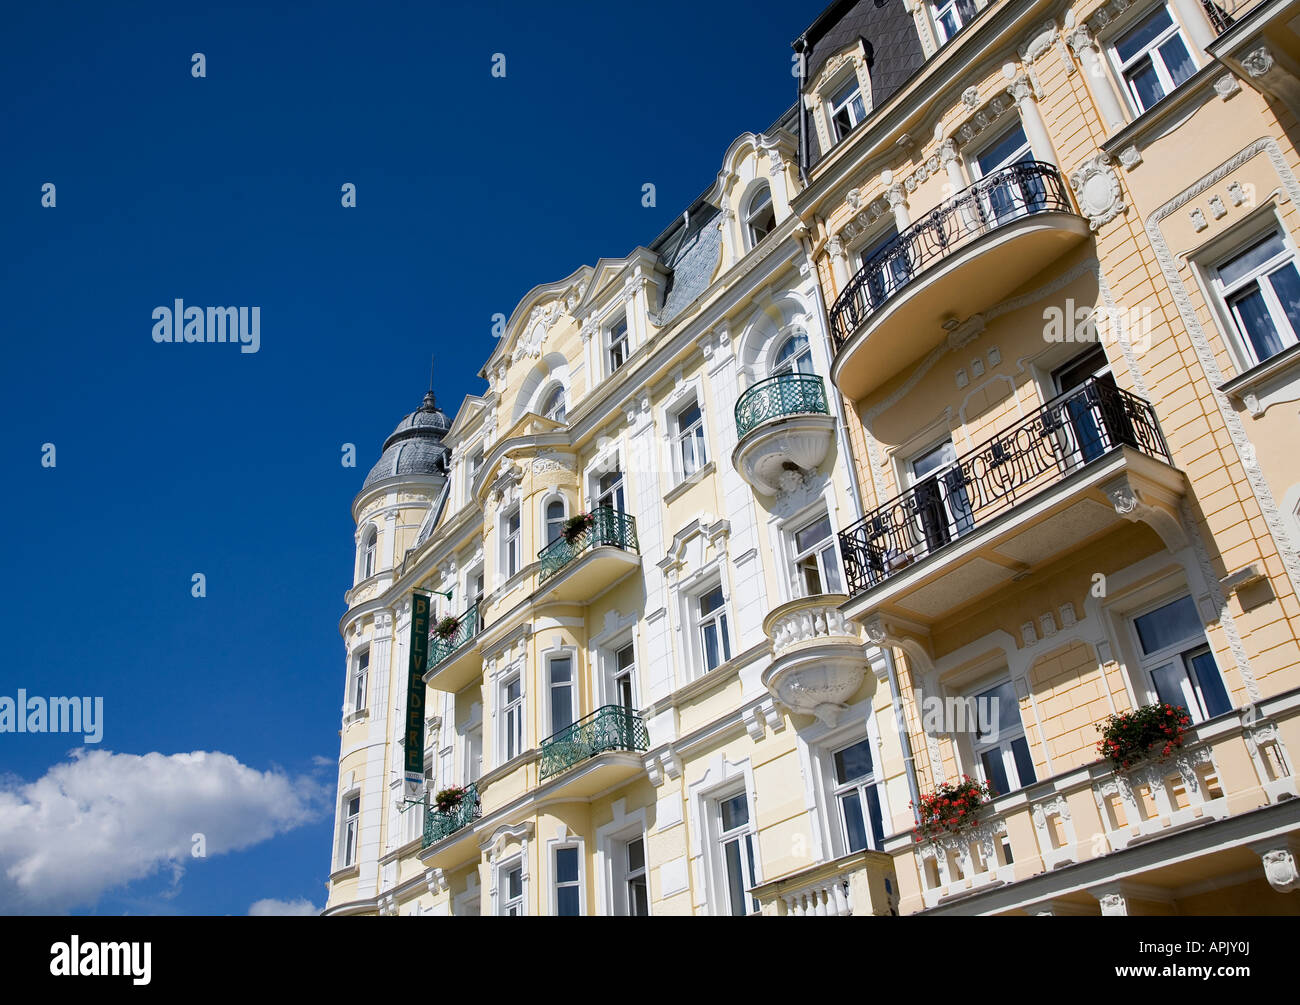 Traditional yellow and white painted hotel Belvedere building in Goethovo Namesti square Marianske Lazne Czech Republic Stock Photo